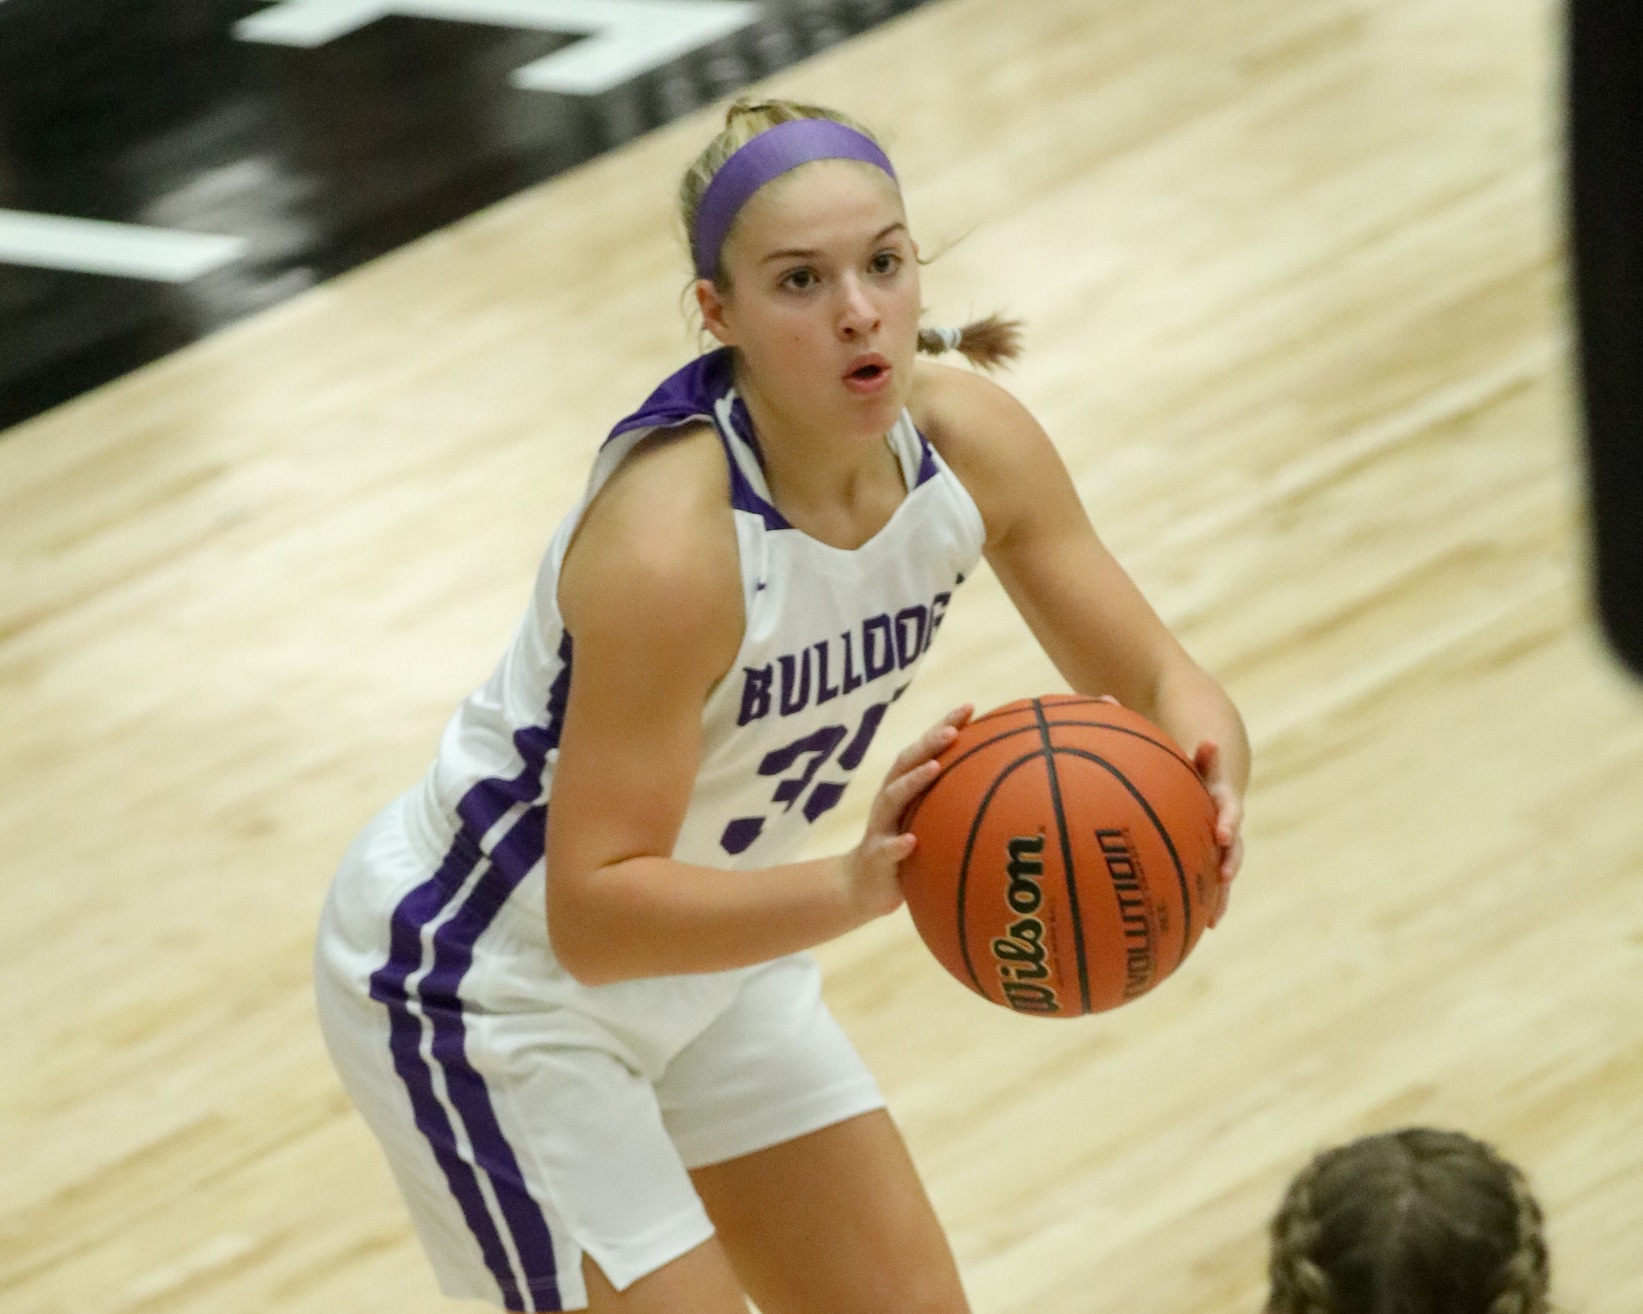 Late surge helps No. 9/9 @bhsdogsghoops sink Noblesville in HCC opener